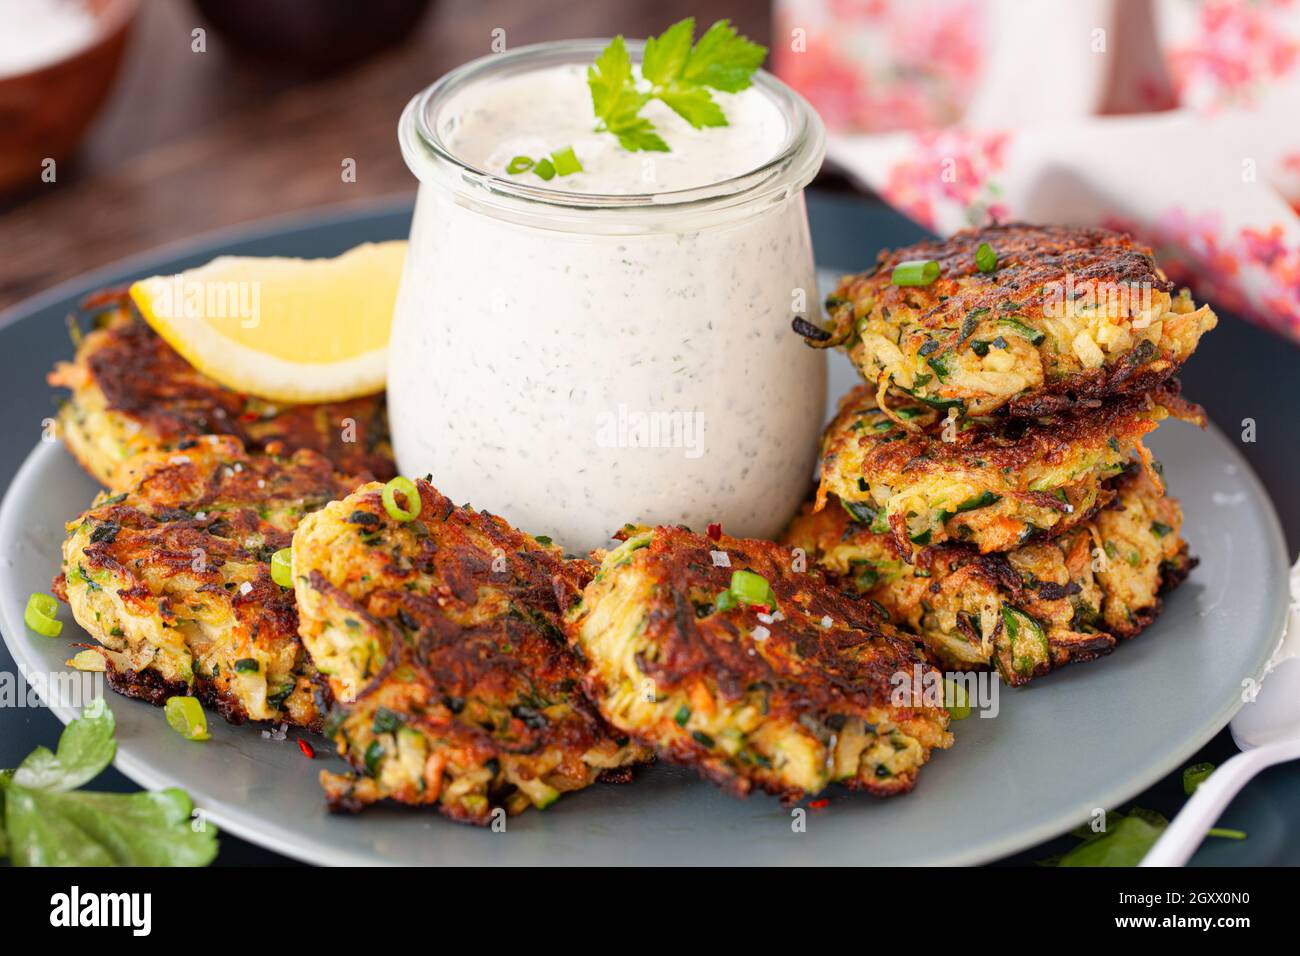 Savory zucchini vegetable fritters with a sour cream dip Stock Photo